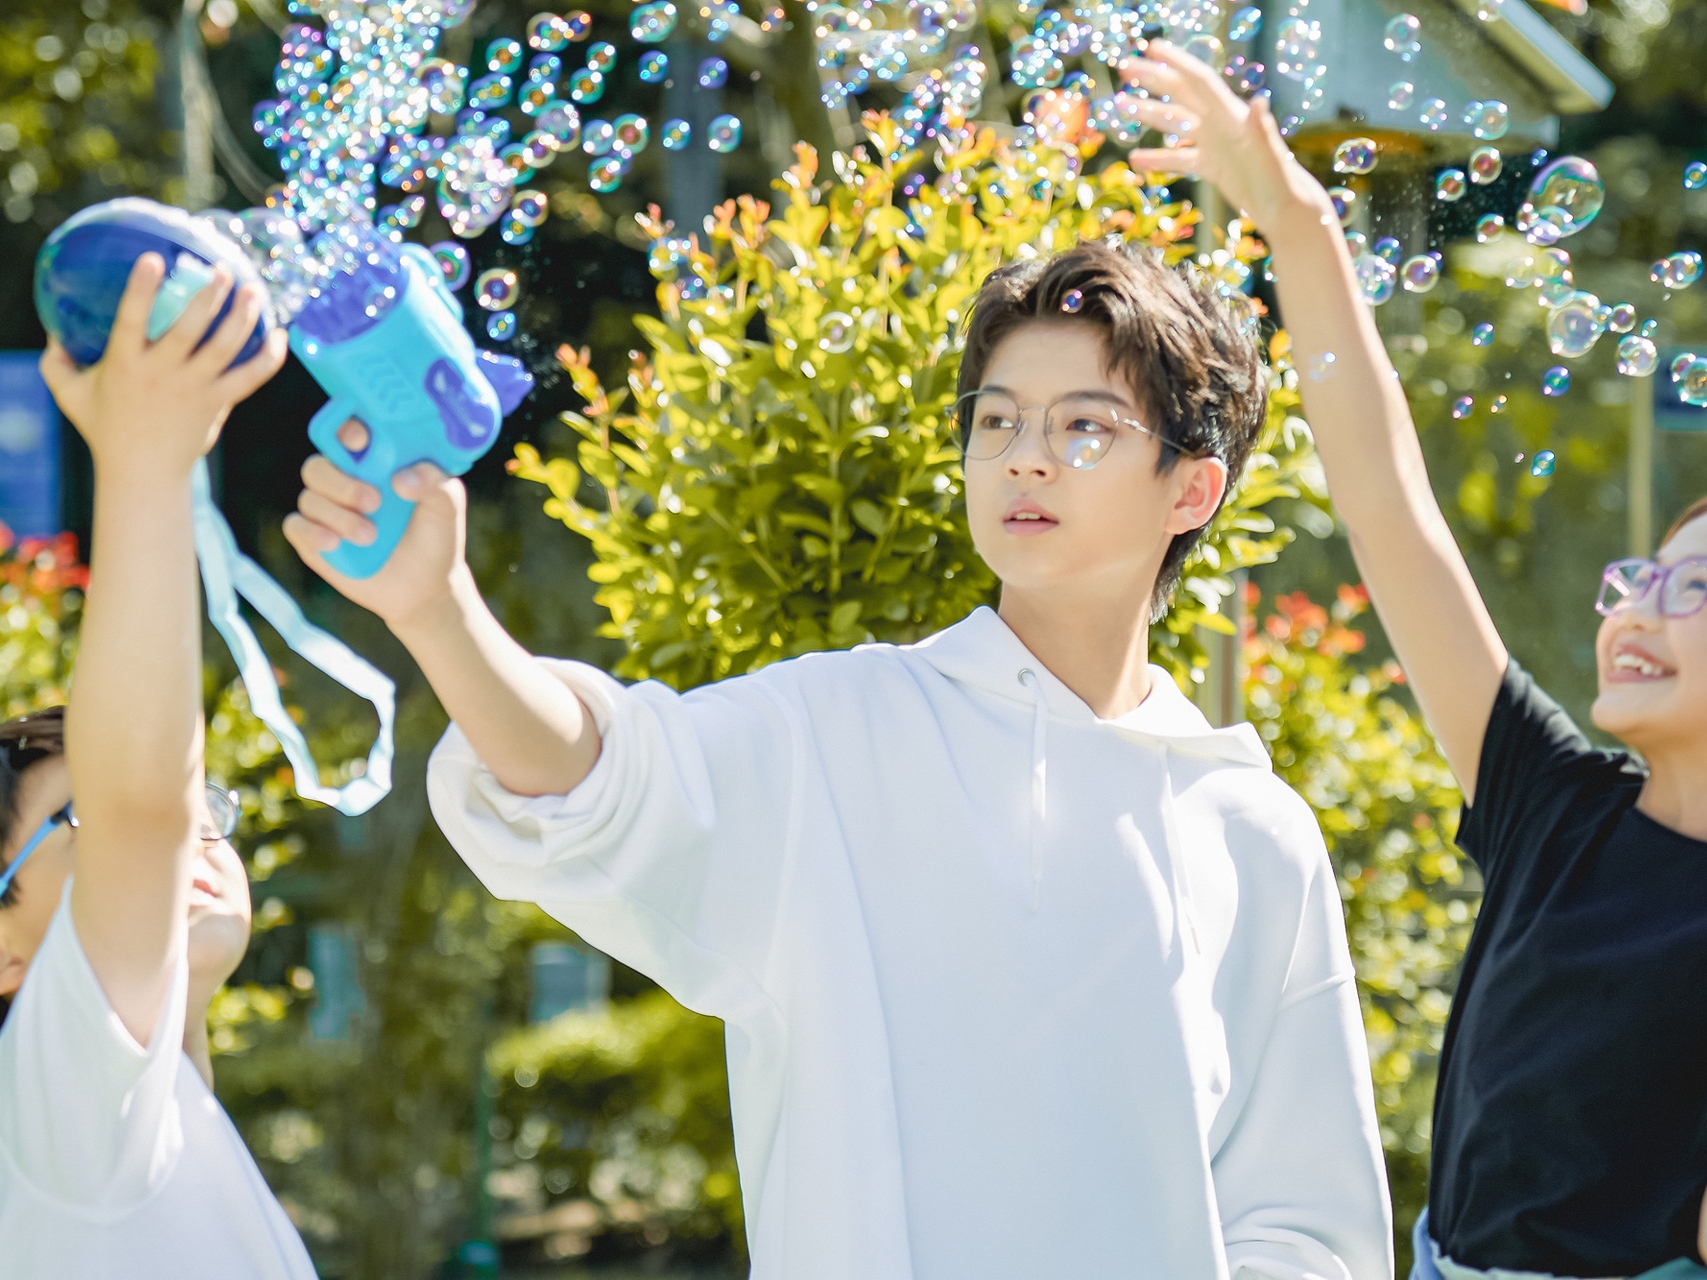 A teenager and two children wearing ZEISS Myopia Management lenses playing with soap bubbles.